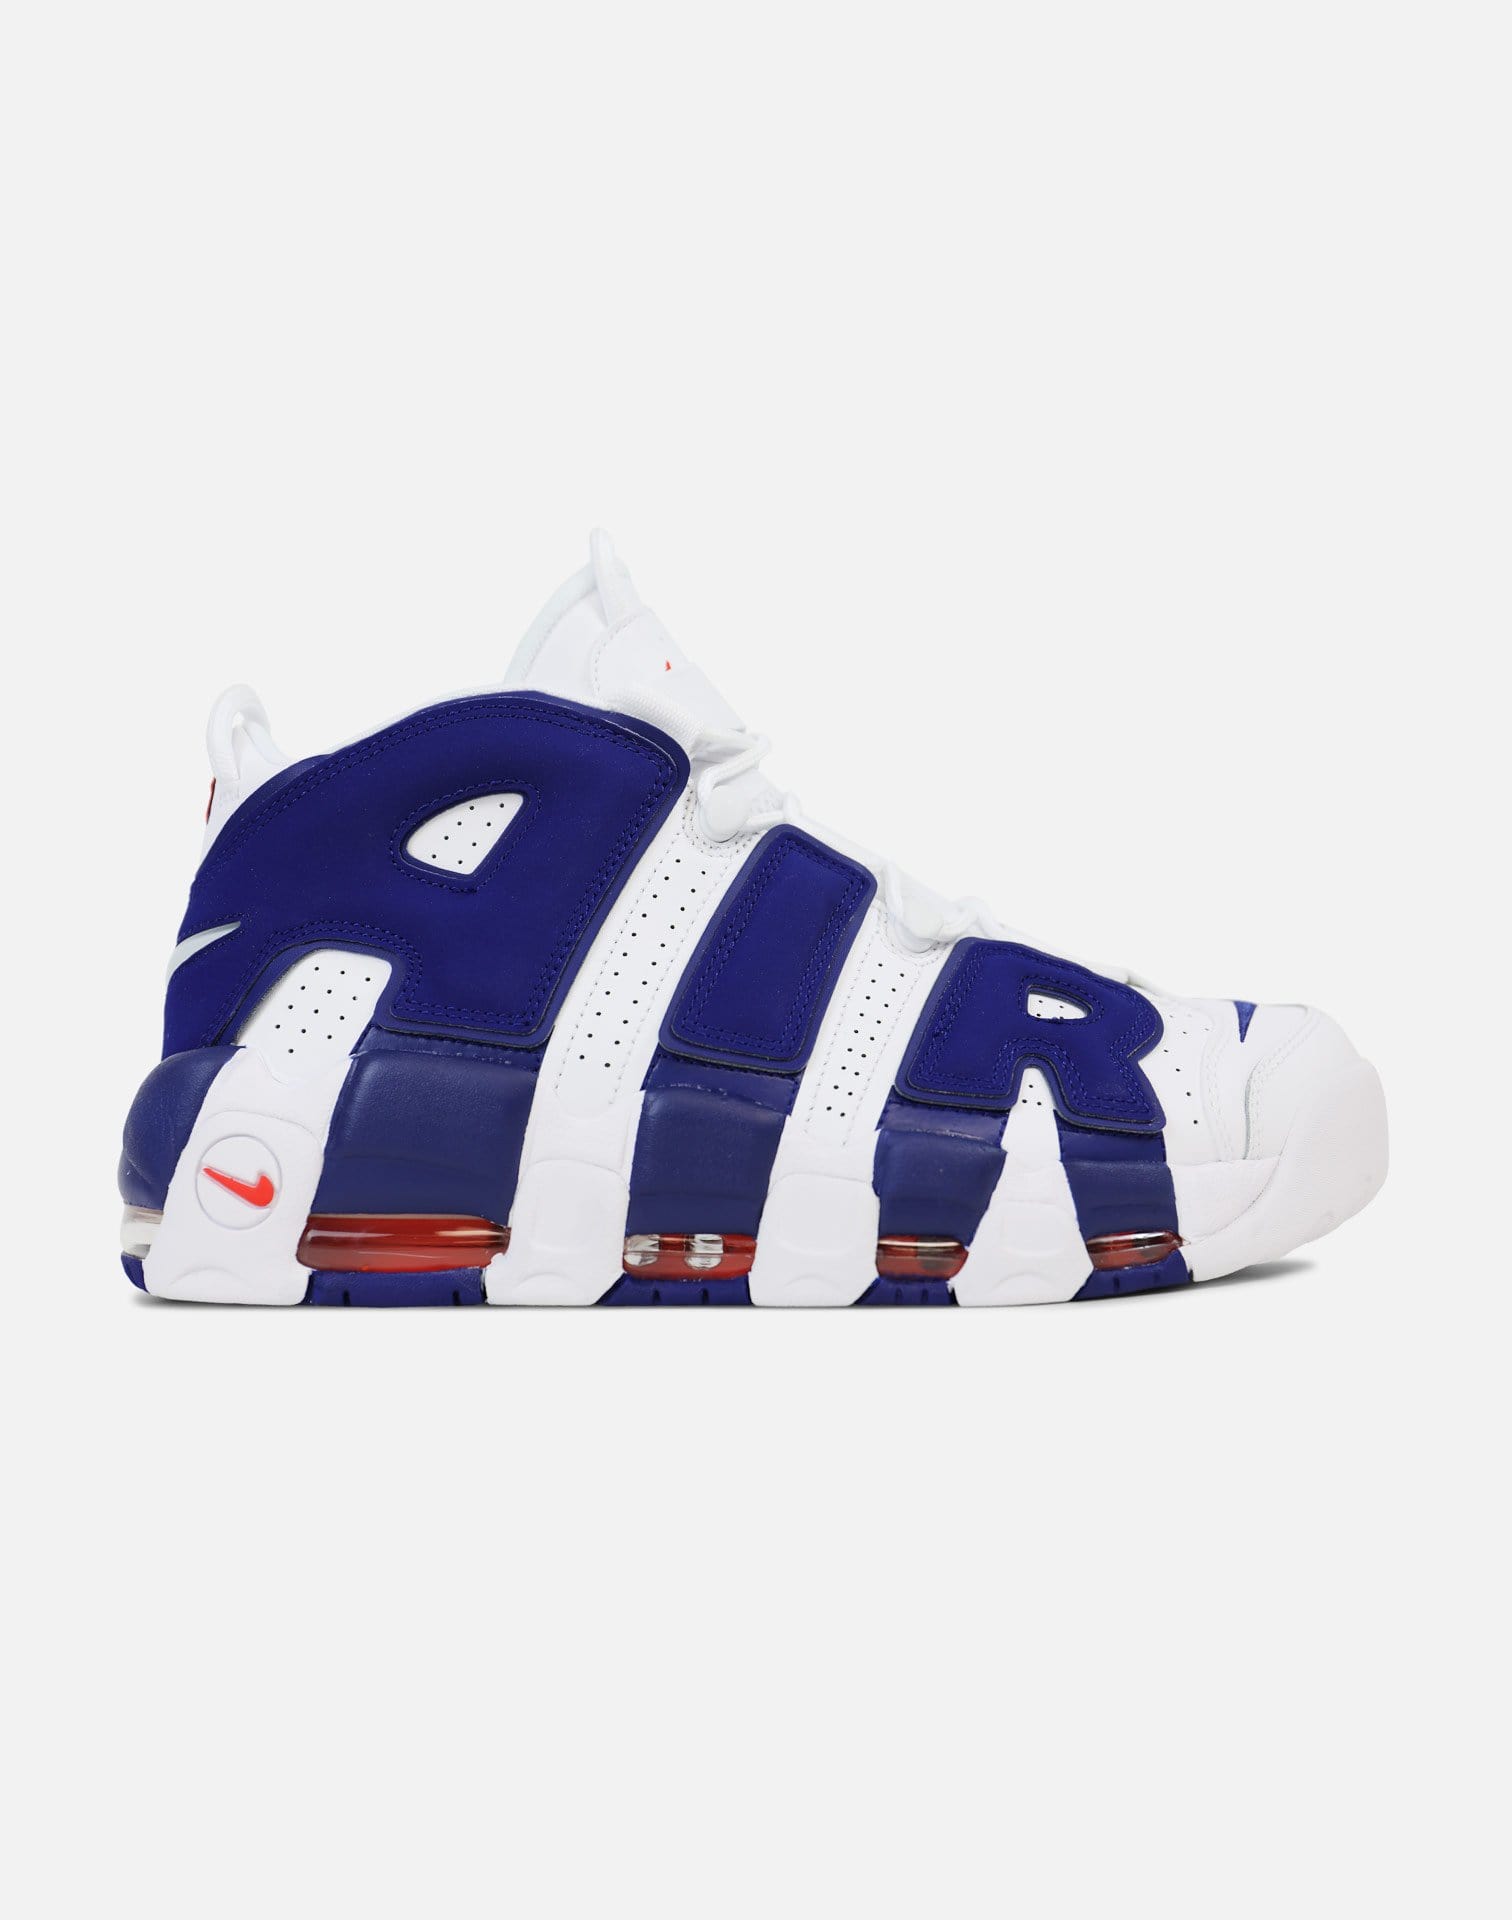 Nike Air More Uptempo 96 'Air With Authority' (White/Deep Royal Blue-Team Orange)